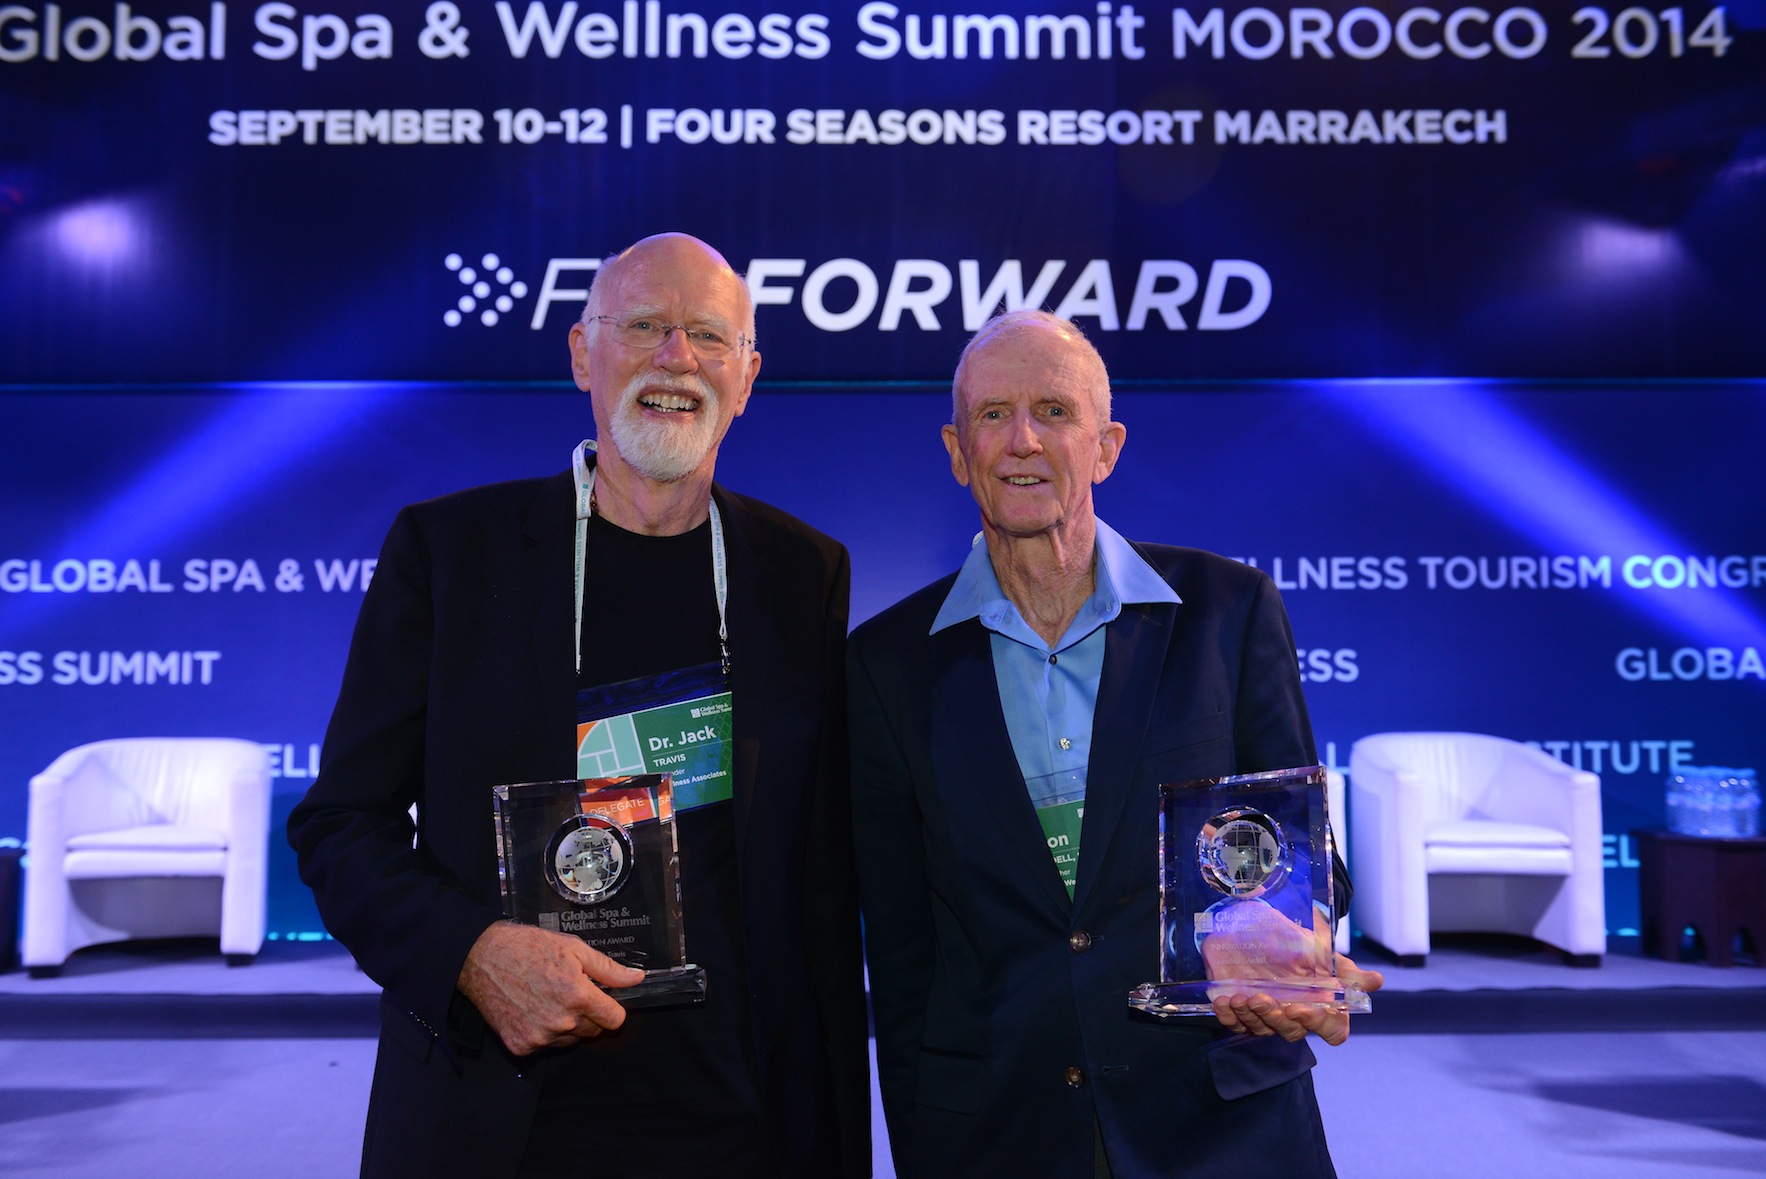 Dr Jack Travis and Don Ardell celebrate their wins as Wellness Innovators at Global Wellness Awards